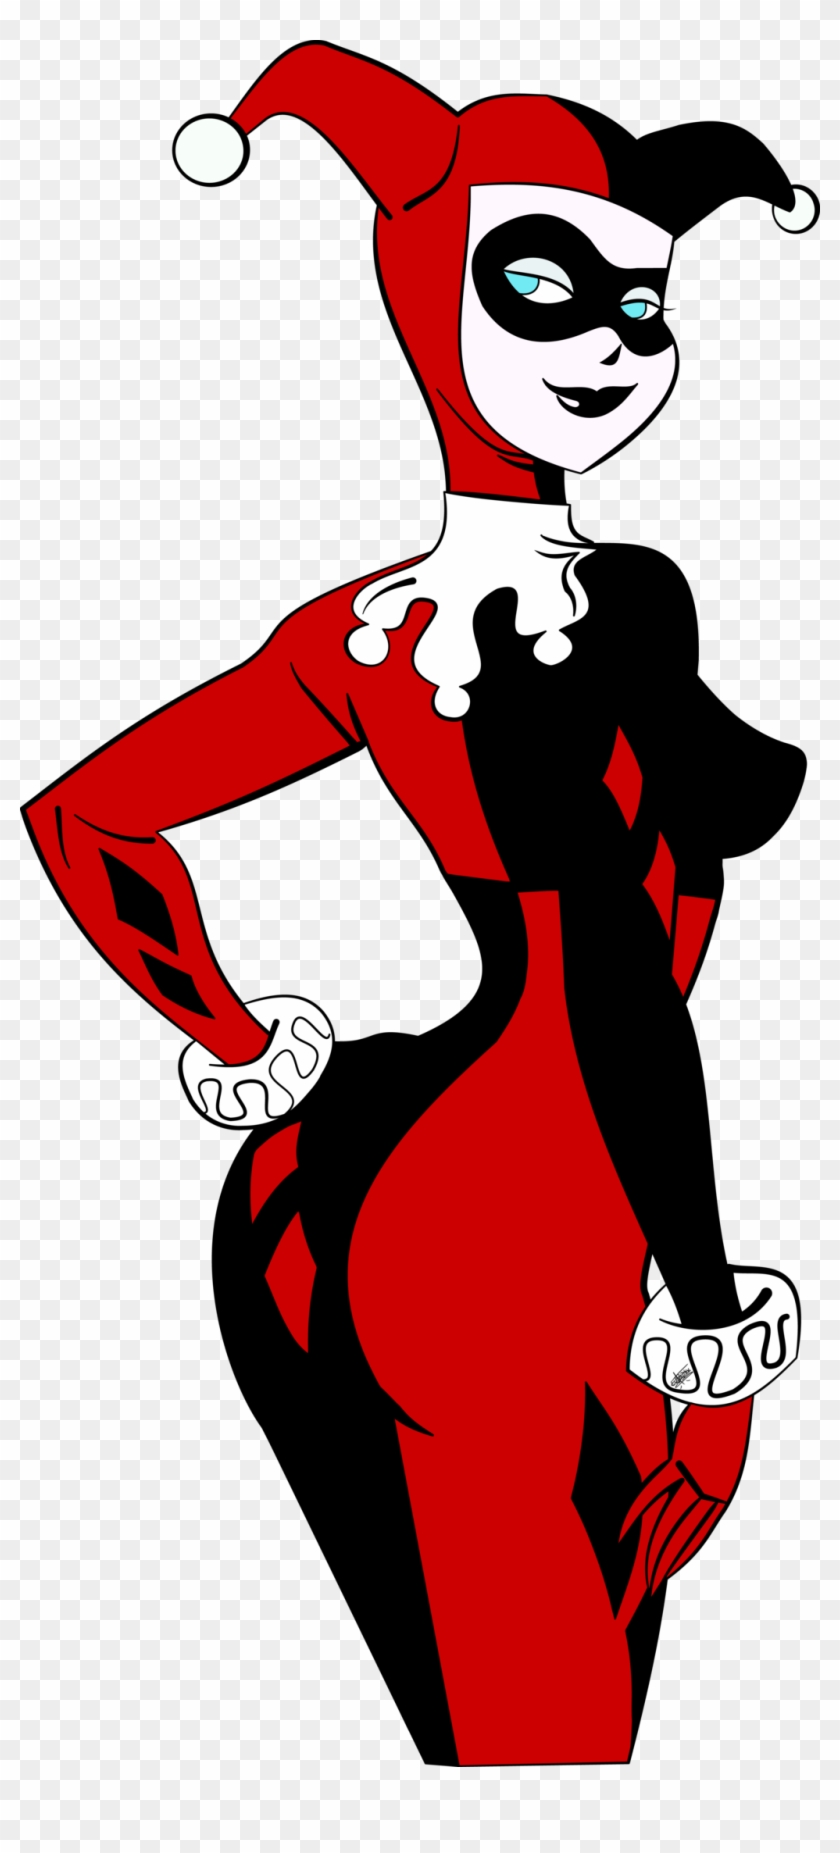 Harley Quinn By Frozenfish696 Harley Quinn By Frozenfish696 - Bruce Timm Harley Quinn #1313816